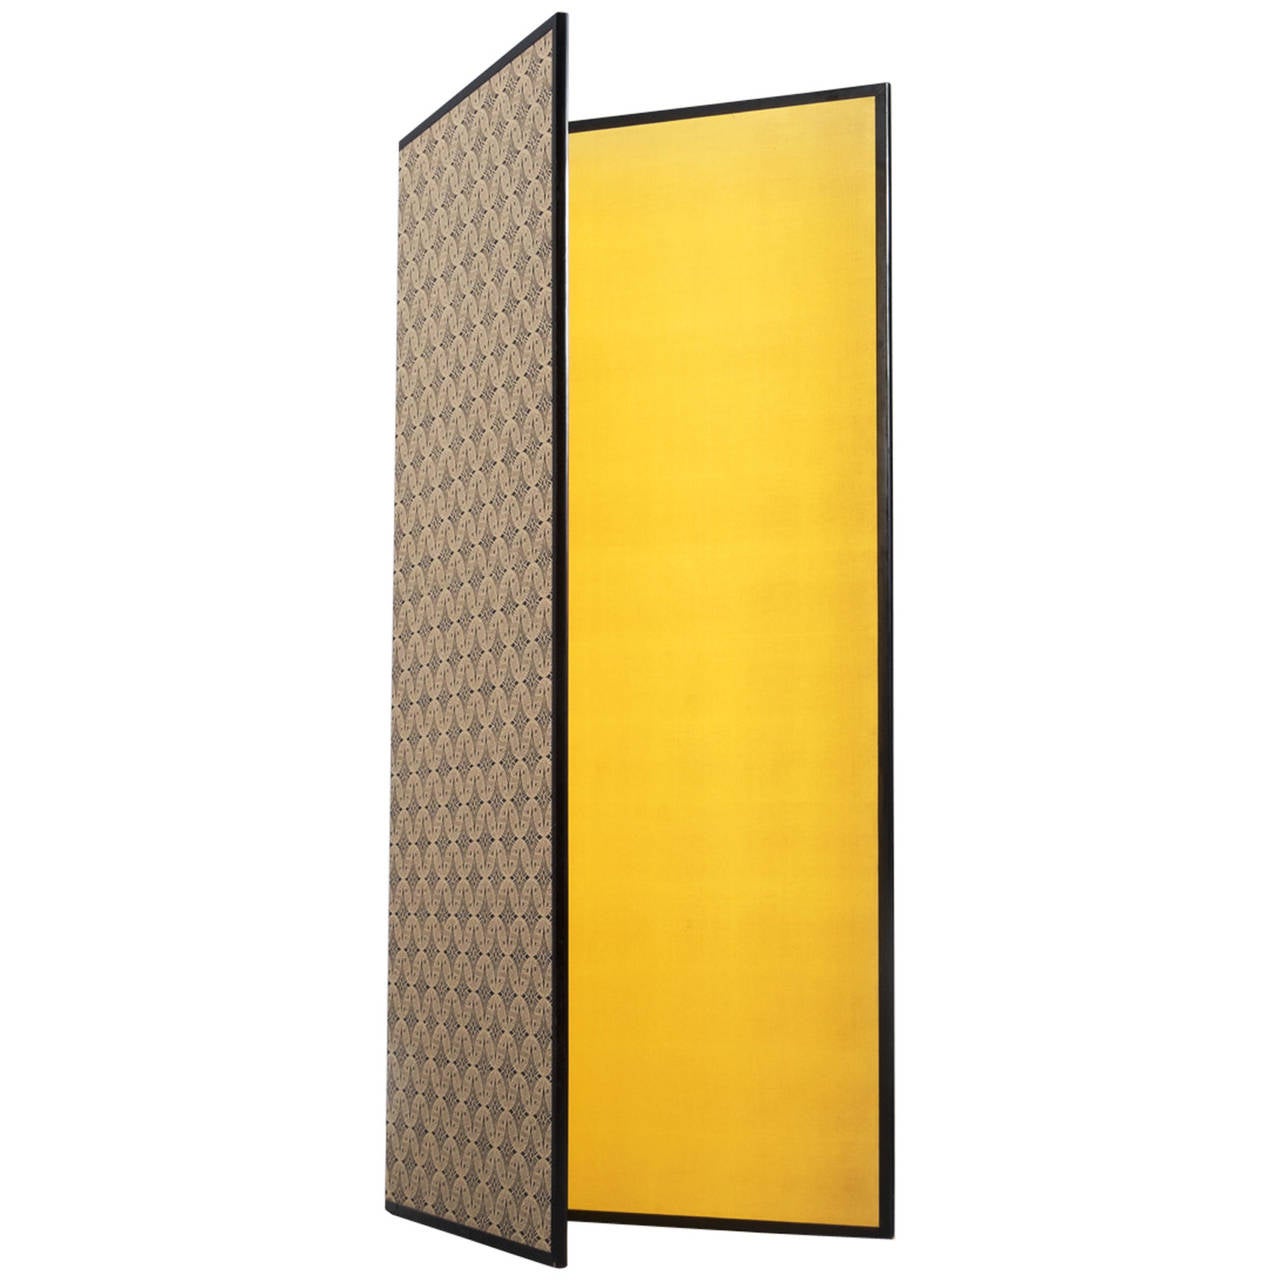 Room screen, gold leaf and lacquered wood, France, 1960s

Gold leaf folding screen from French origin. The two panels are carefully decorated with a nice pattern and gold leaf. Real leaf imprint. This compact paravent is very functional to use as